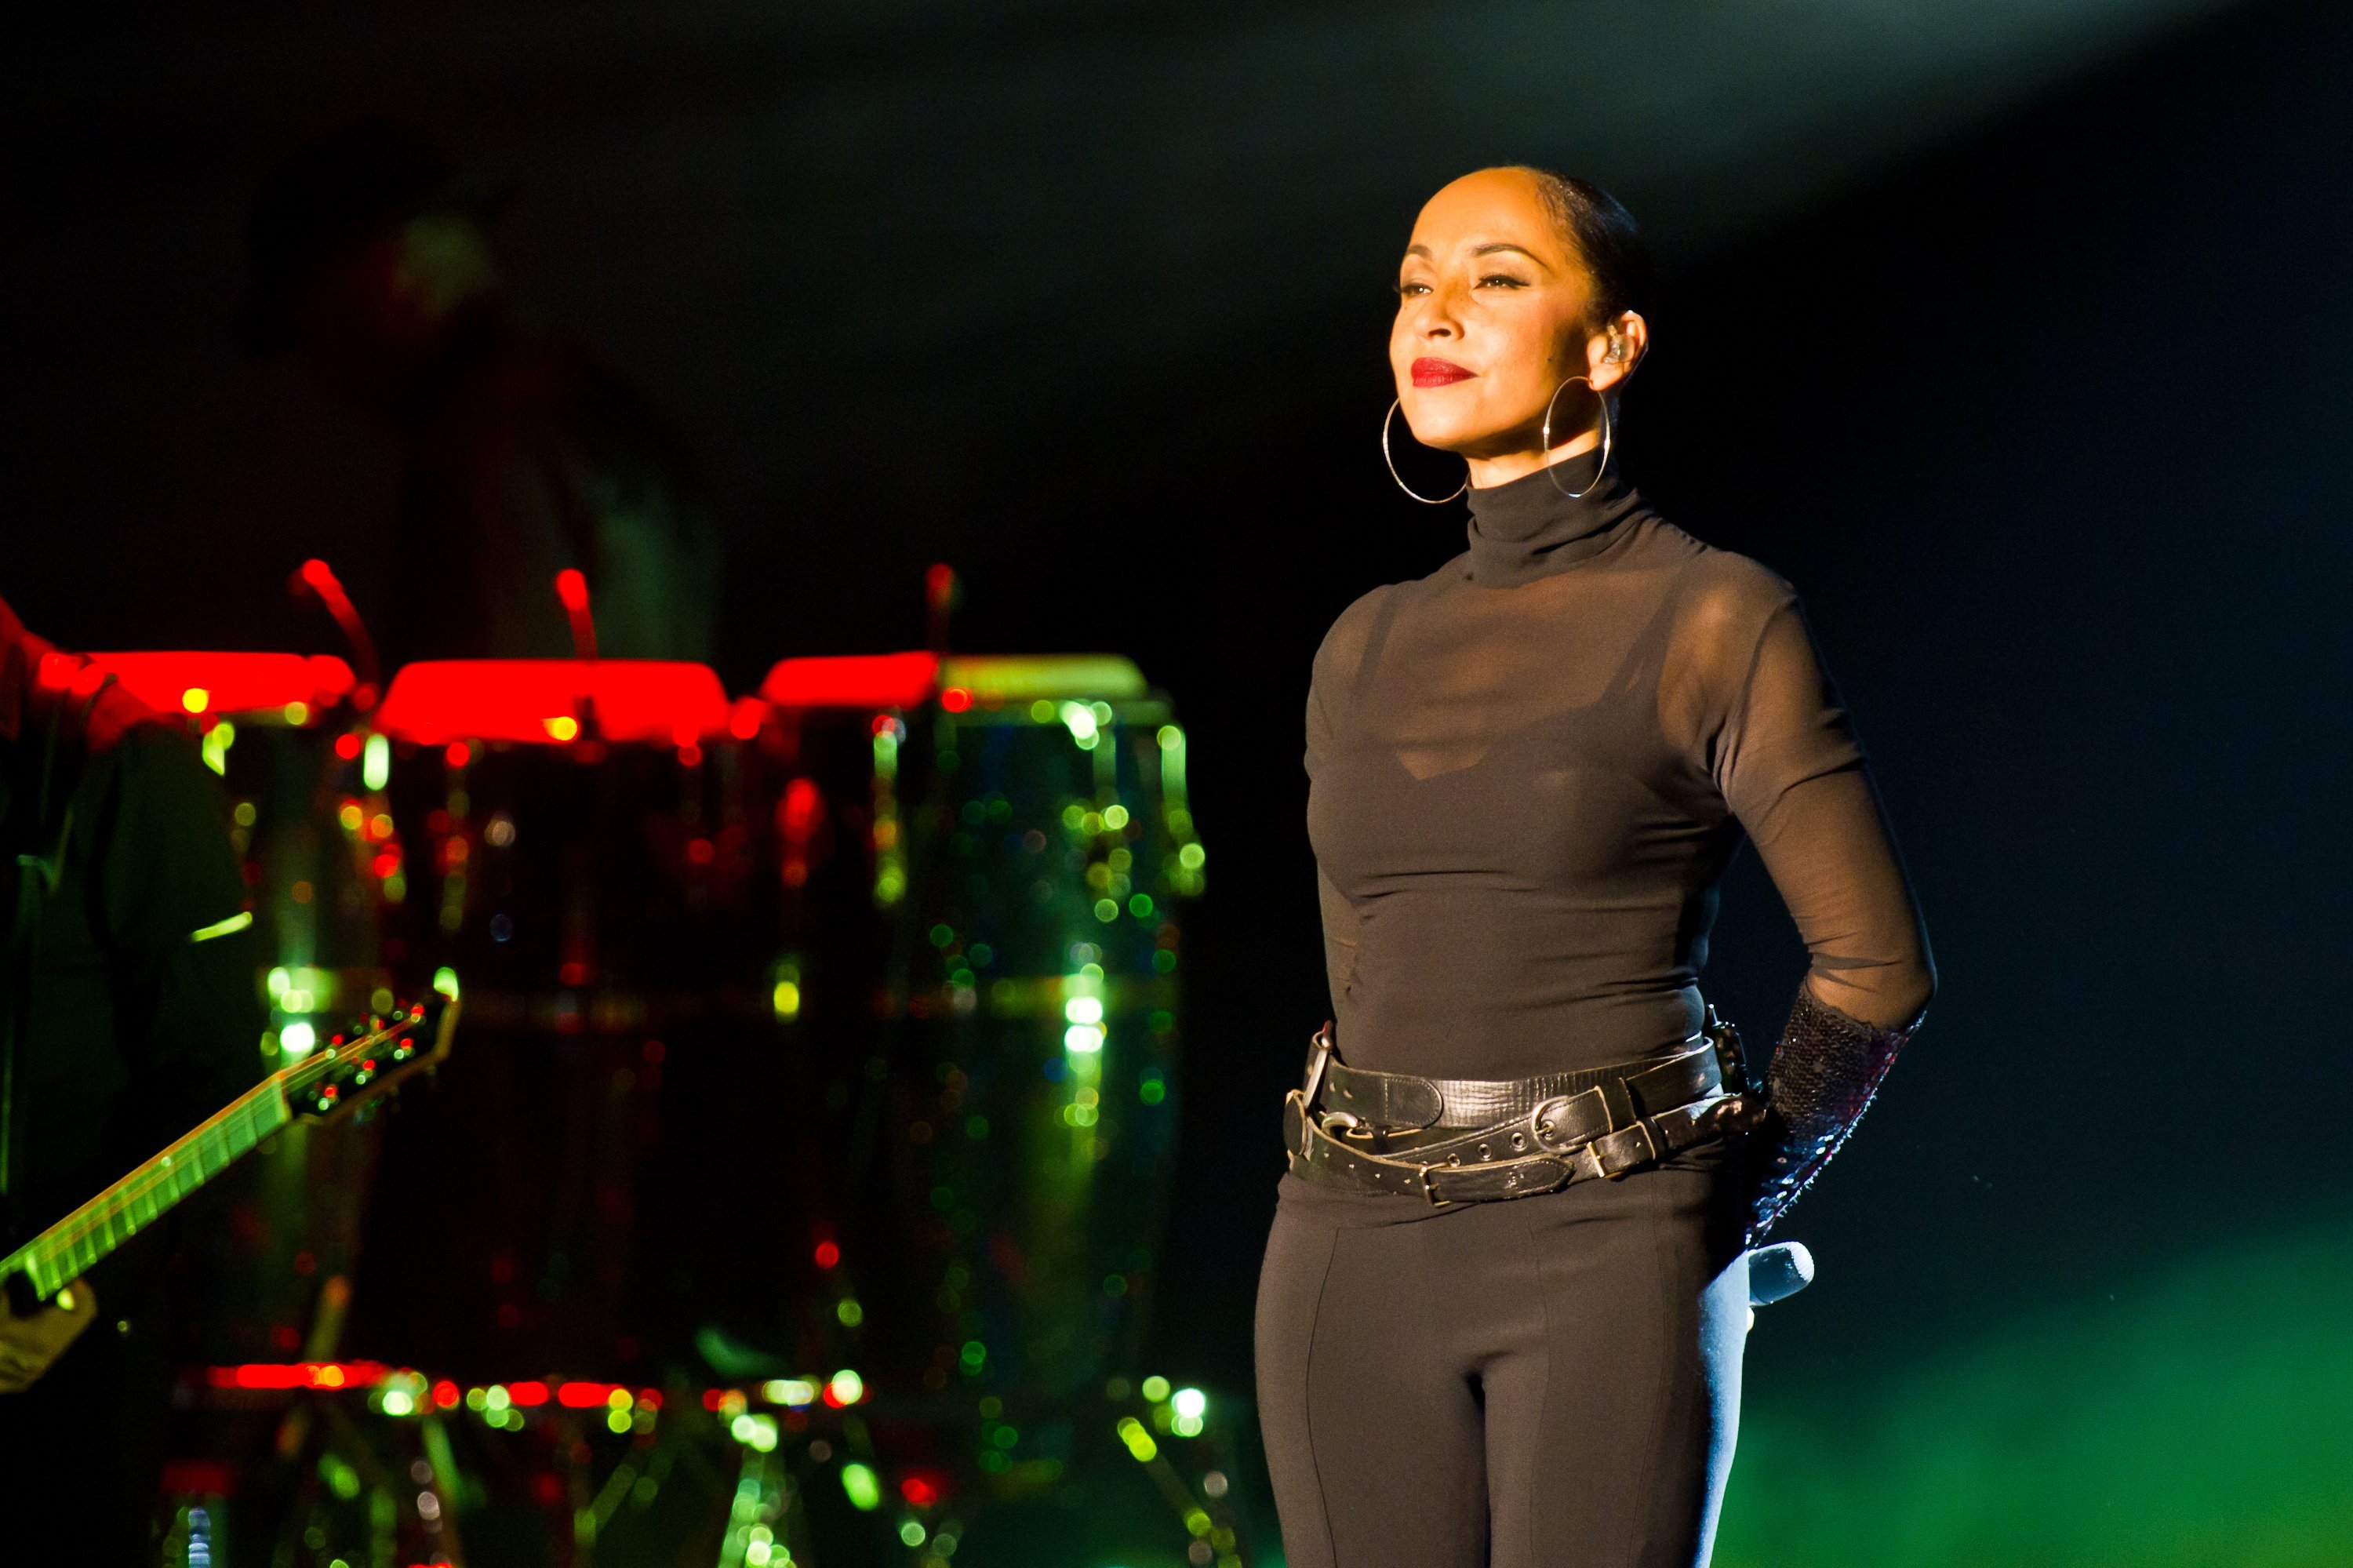 Sade performs at Palais Omnisports de Bercy on May 17, 2011 in Paris, France | Photo: Getty Images